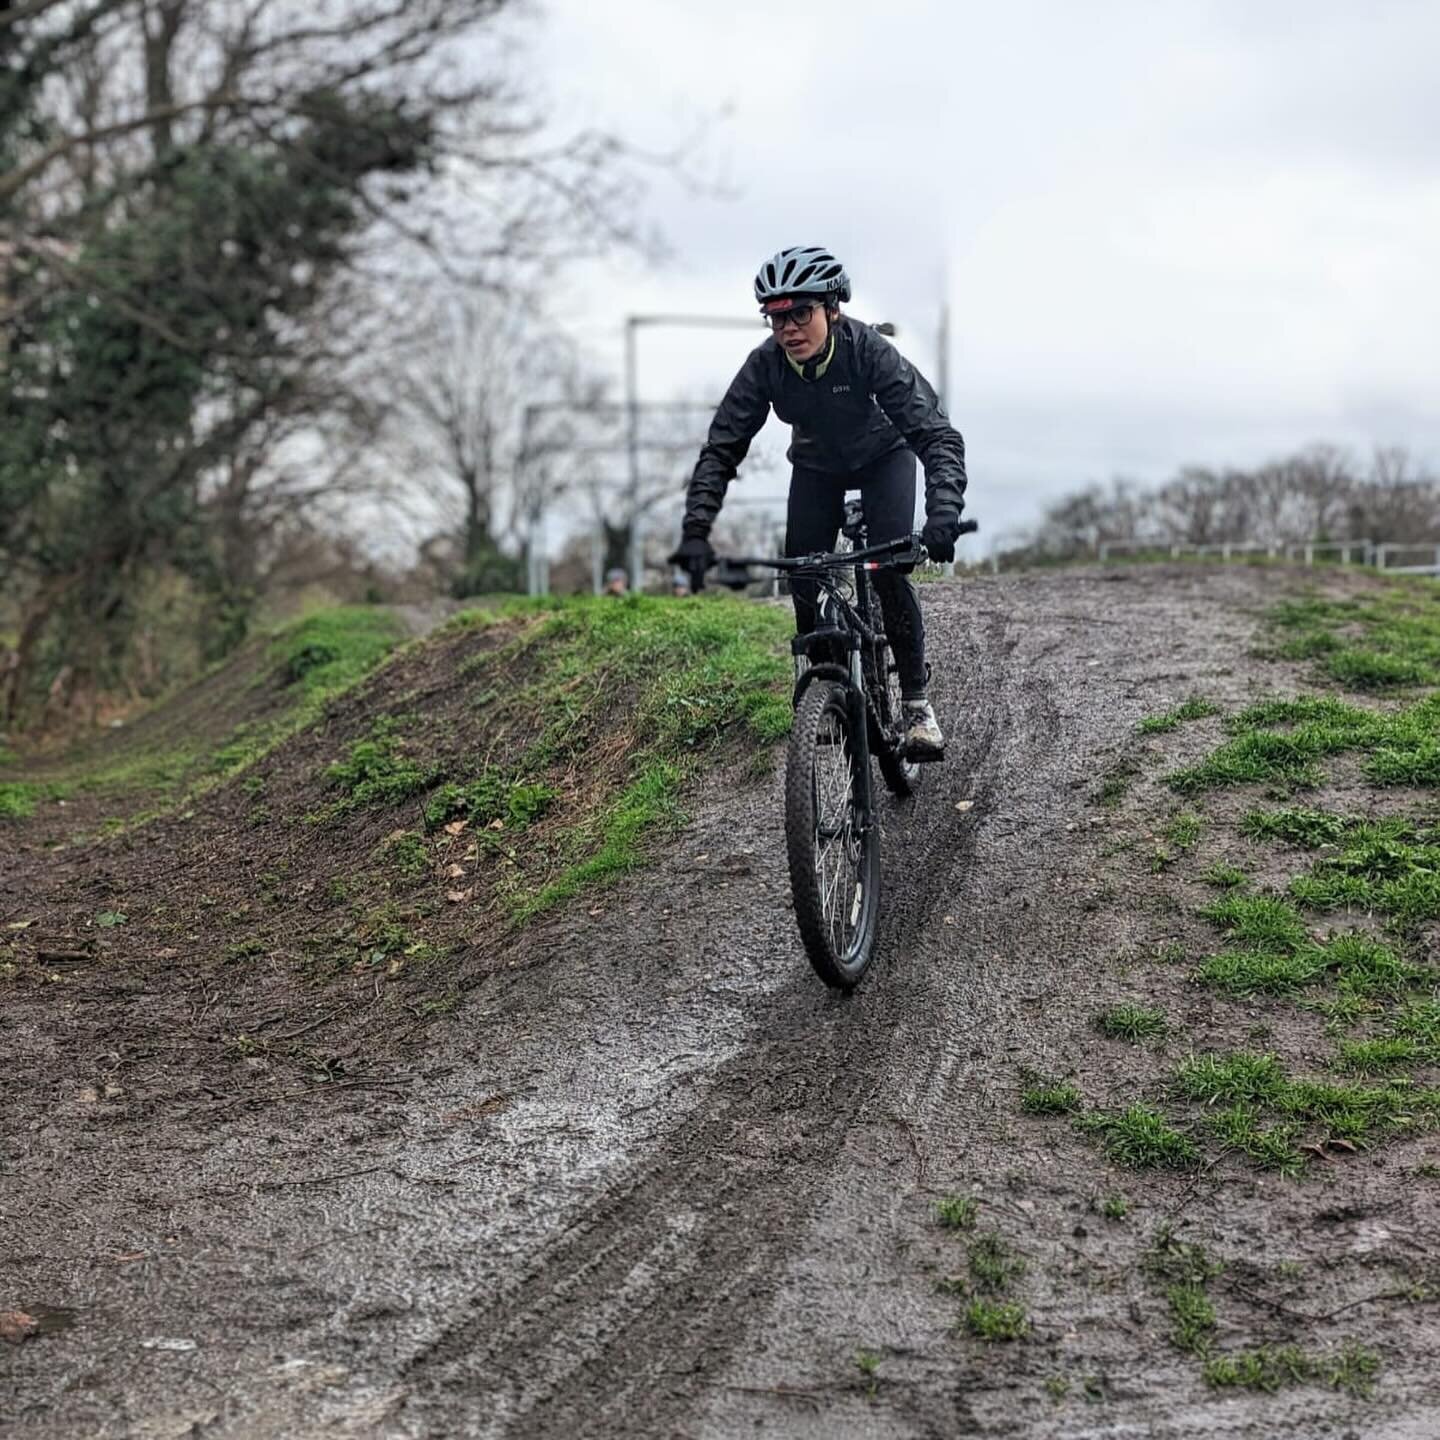 Today we wanted to highlight the amazing &ldquo;Try&rdquo; series organised by the ICC Women committee! 
These rides give our female members a chance to explore such cycling disciples as cyclocross, gravel rides, track as well as learn about bike ski